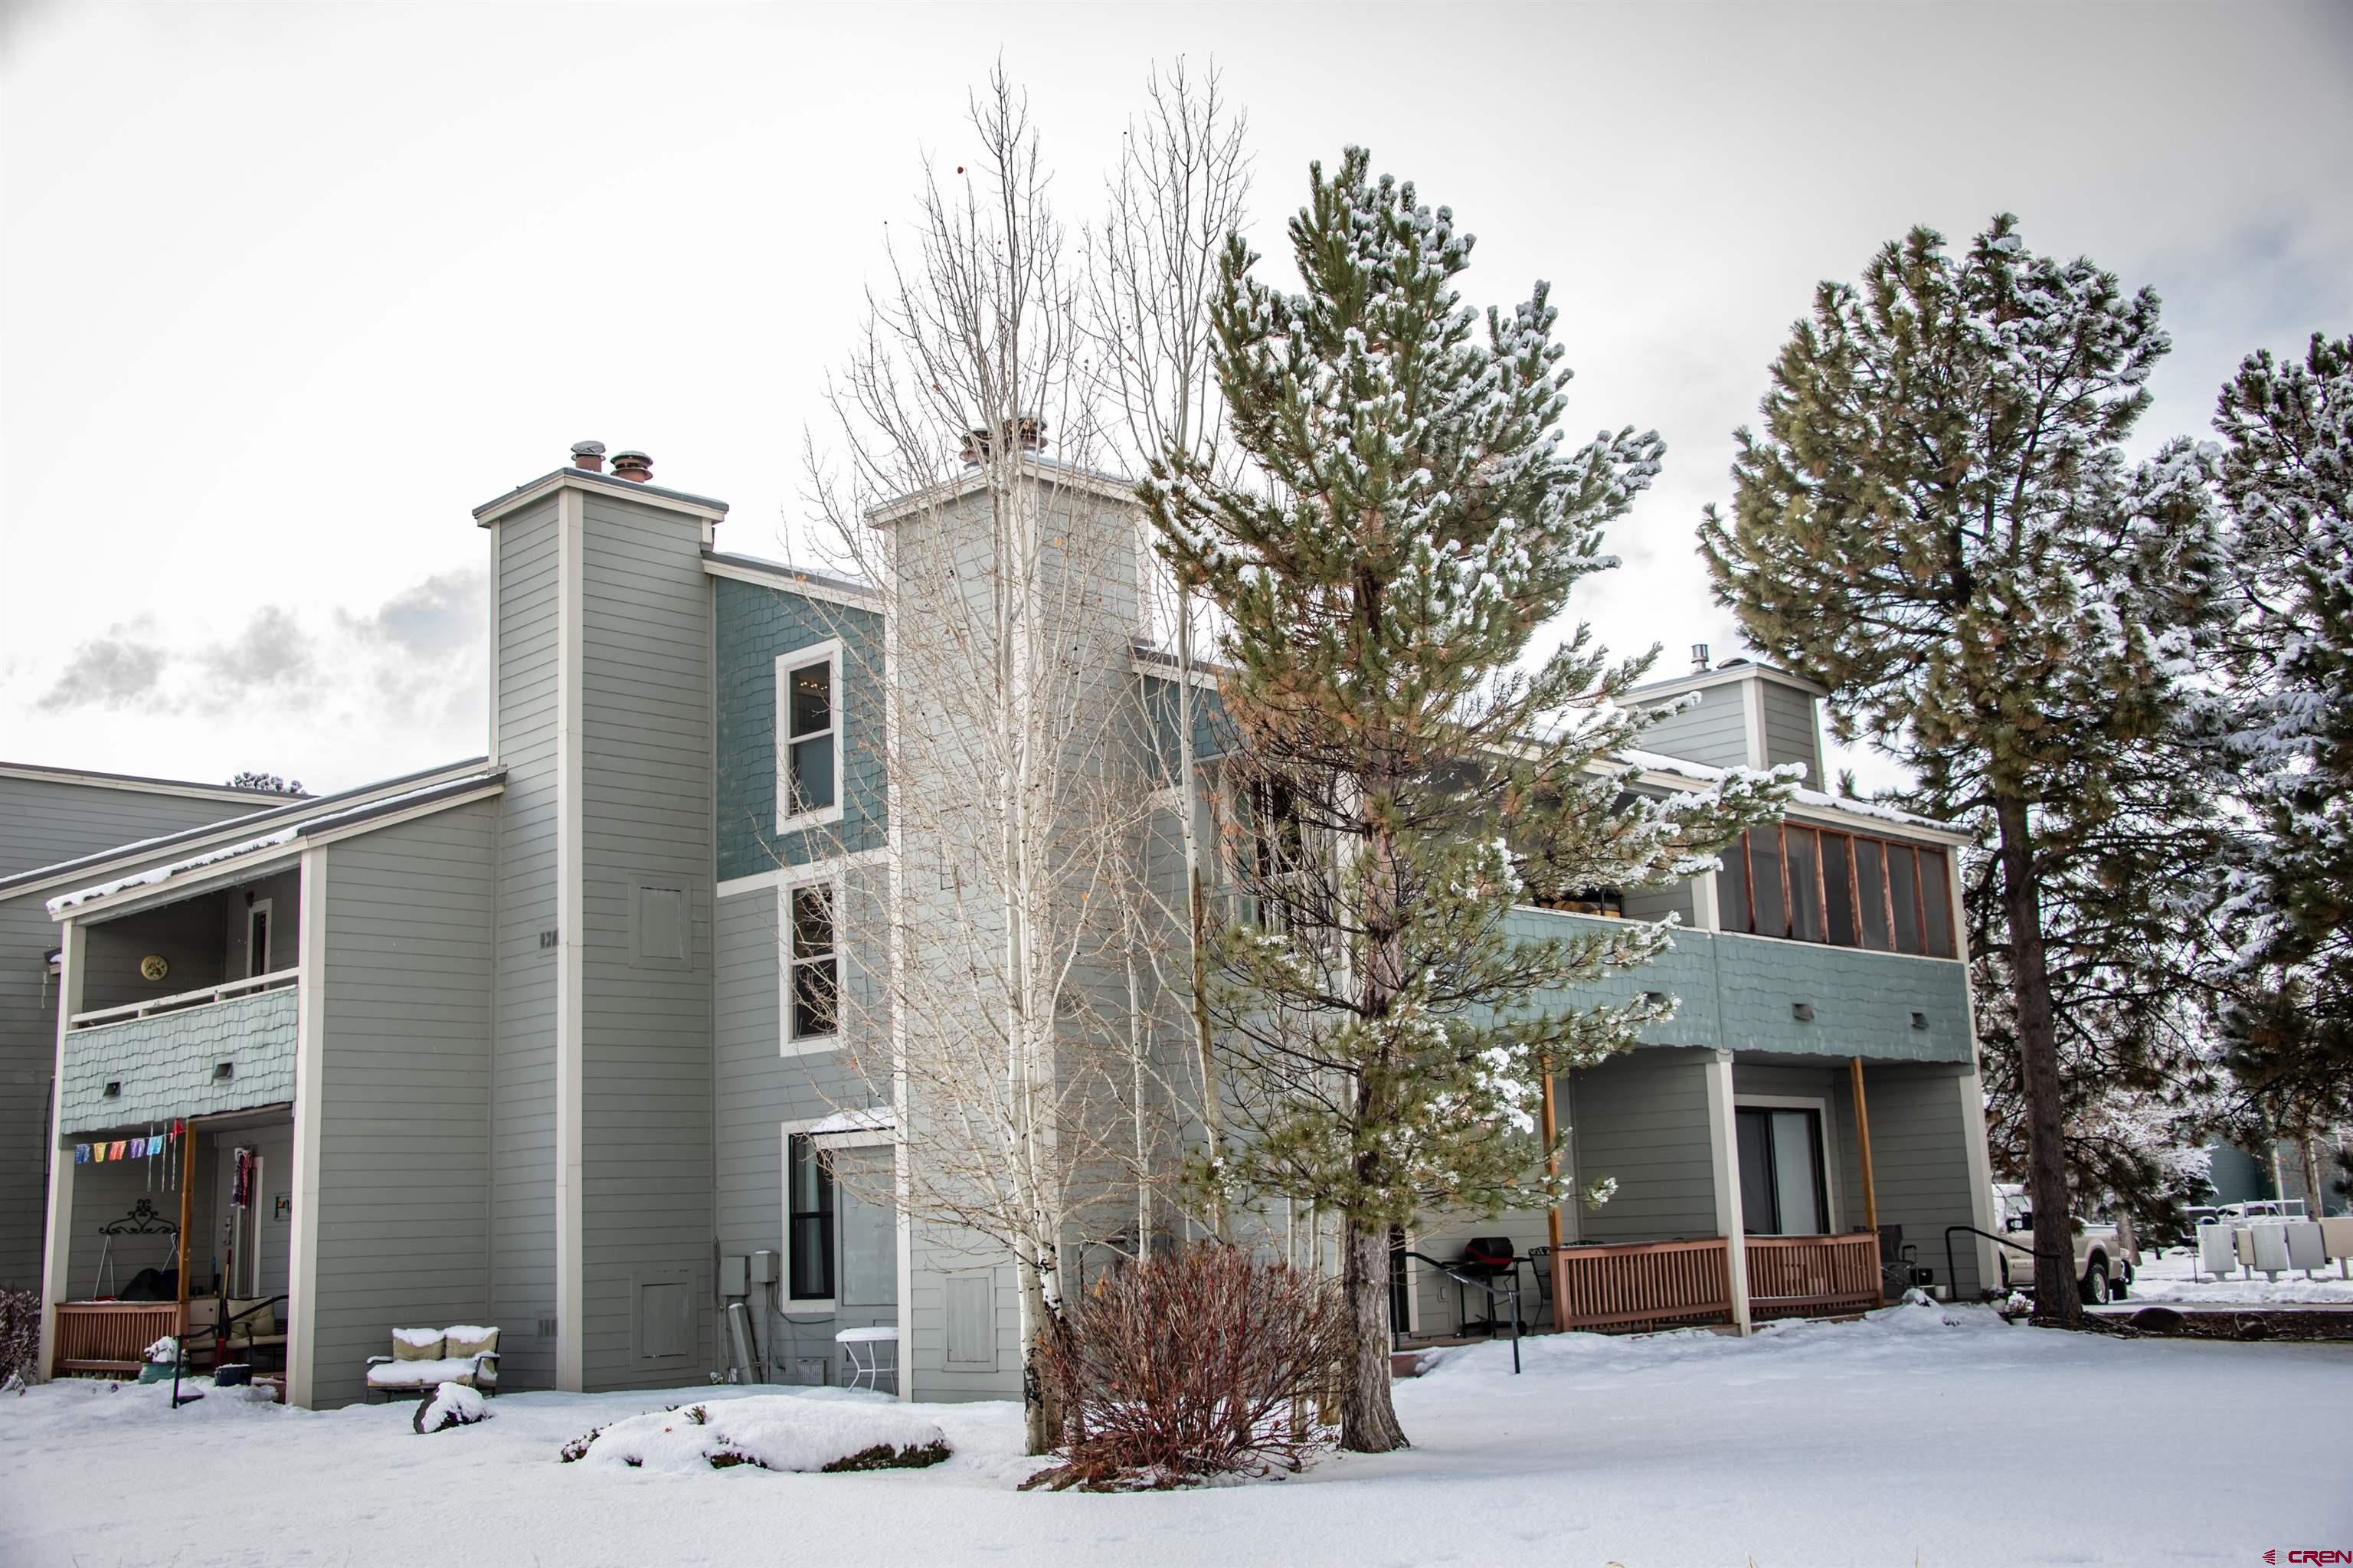 37 Valley View Drive, #3138, Pagosa Springs, CO 81147 Listing Photo  1